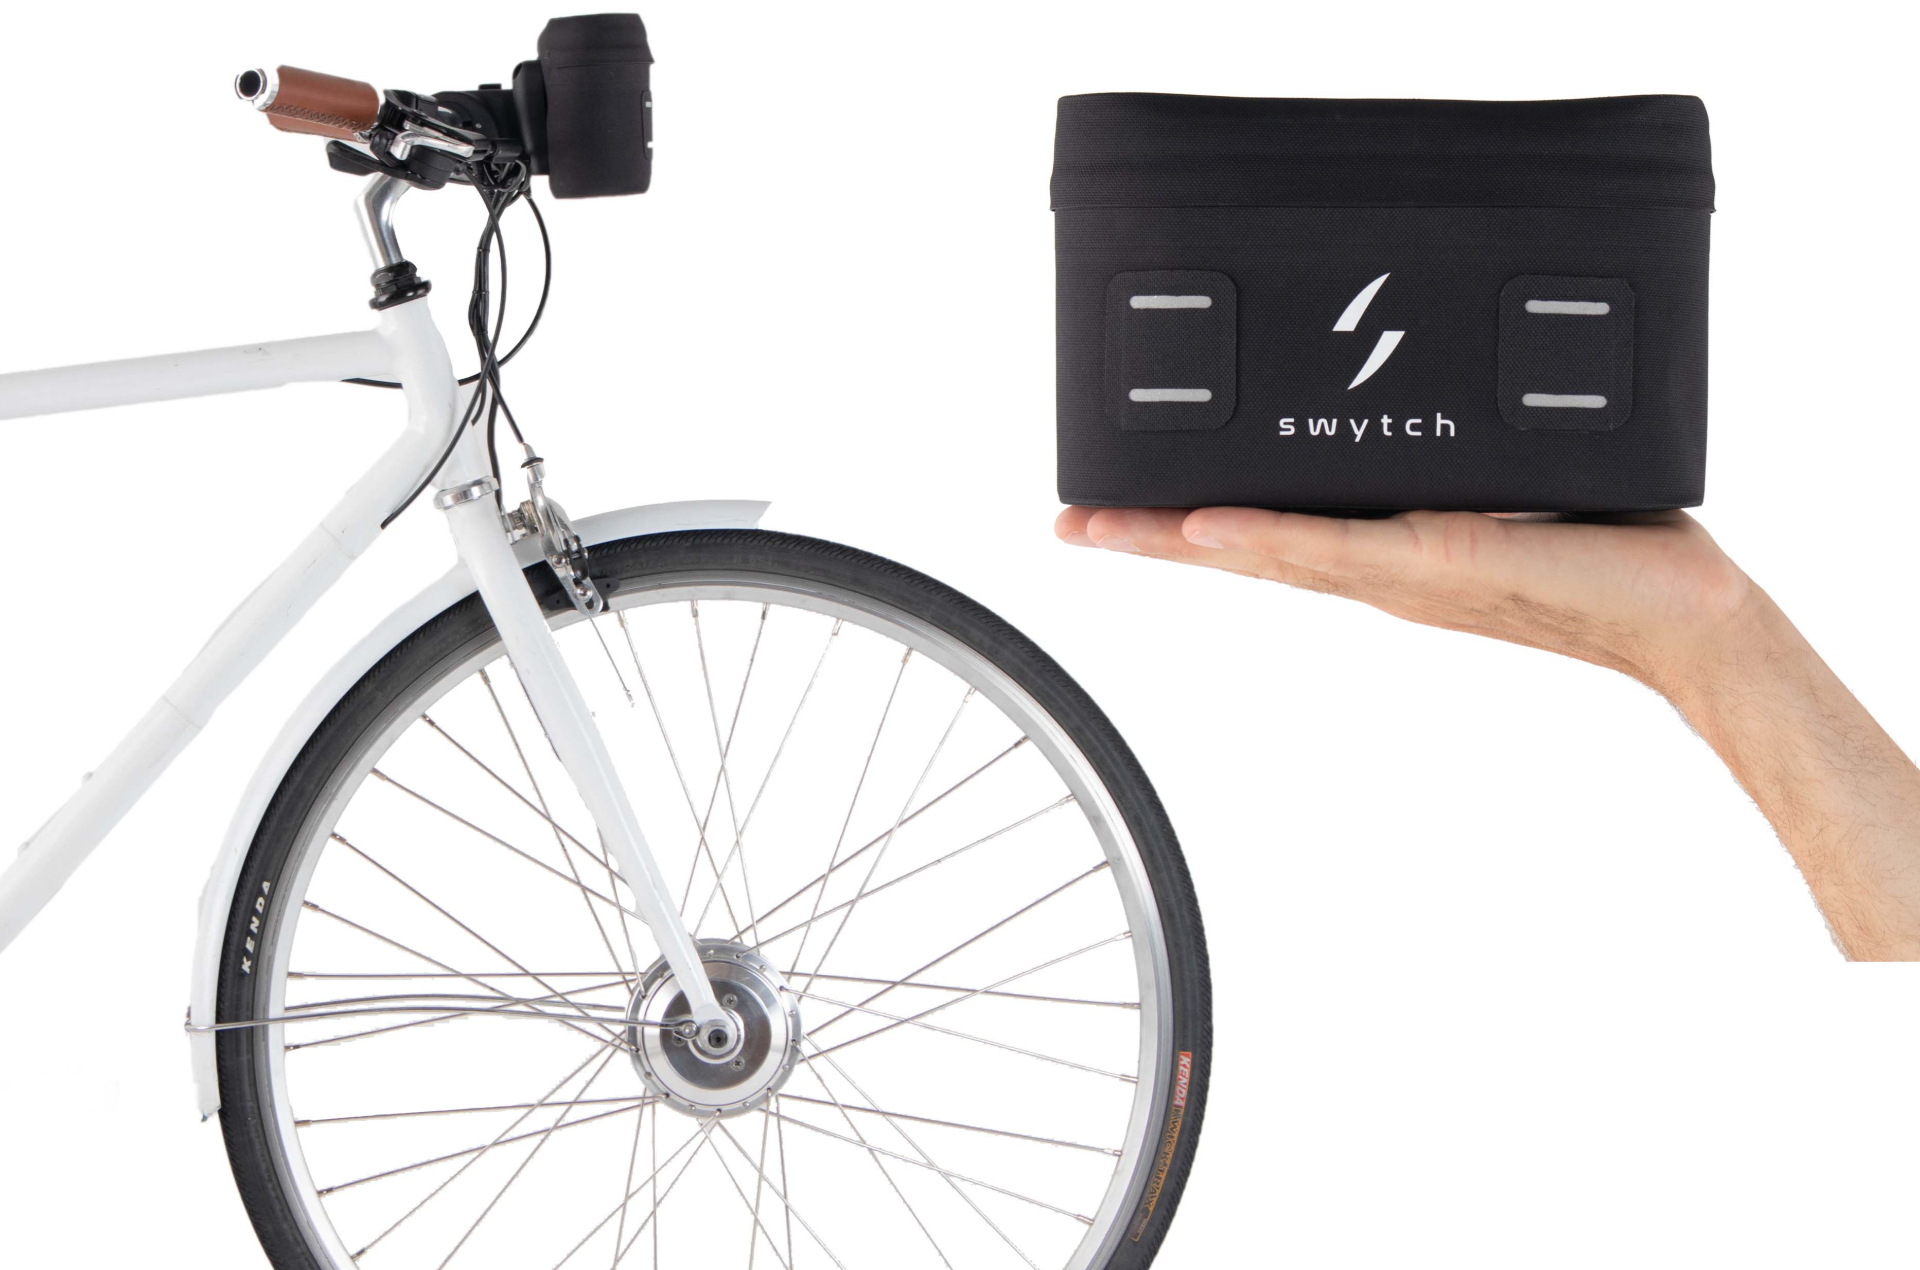 compact swytch kit converts any bike to an e for sustainable transport 3